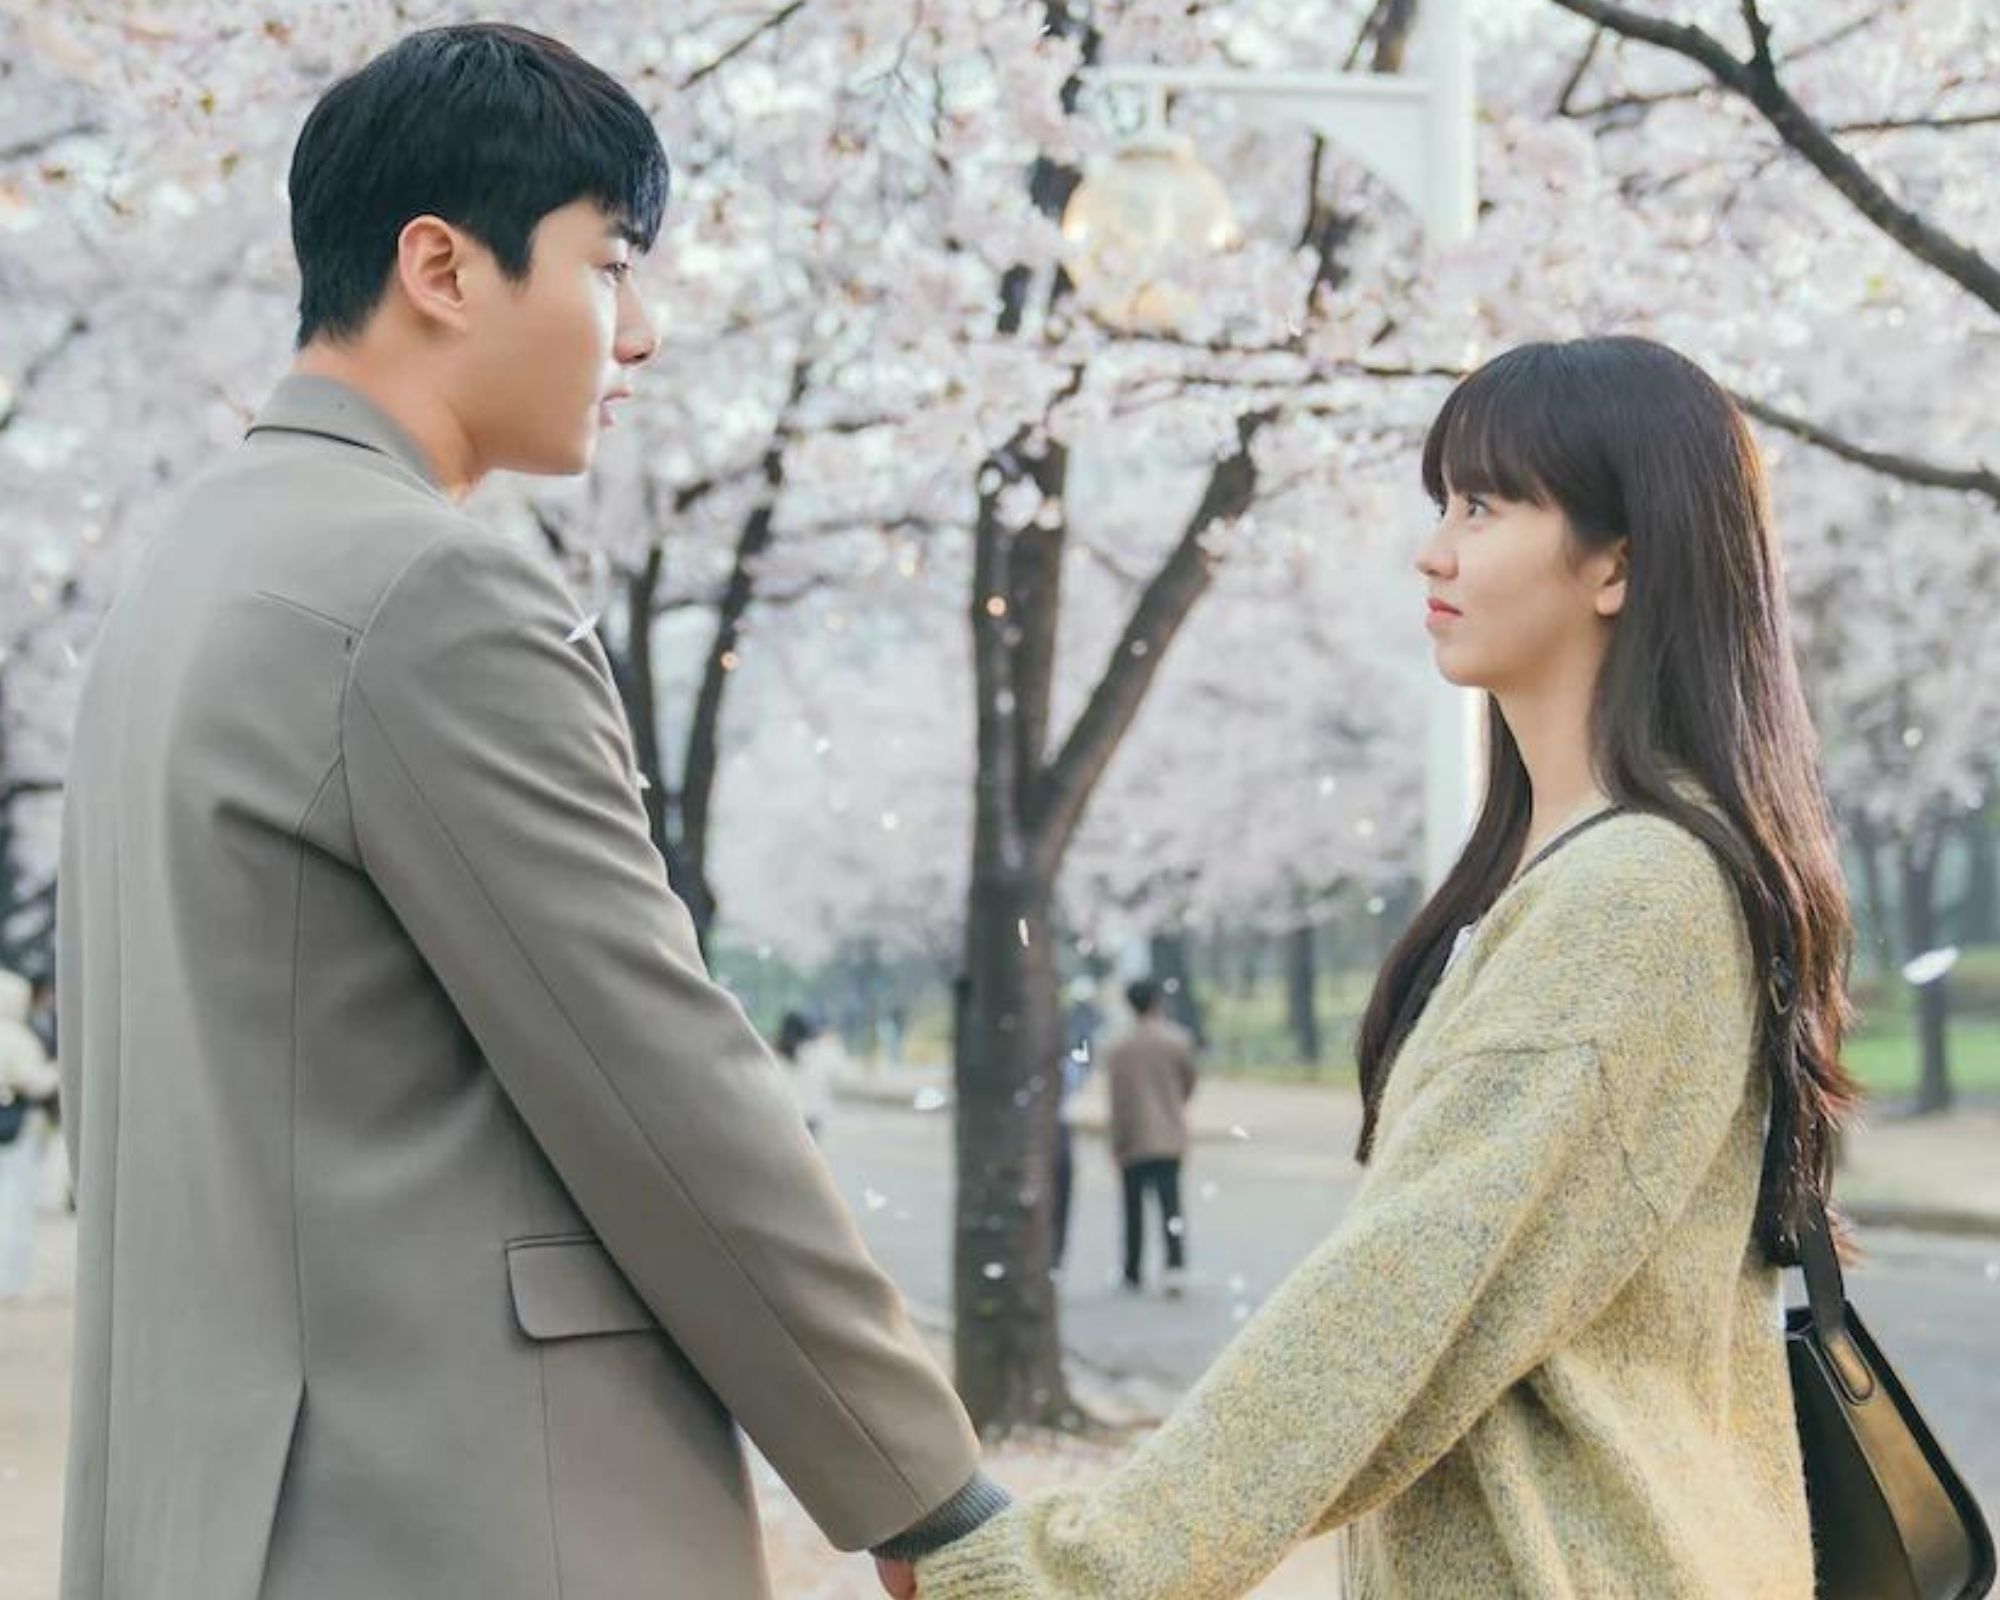 My Lovely Liar - Unspoiled Review